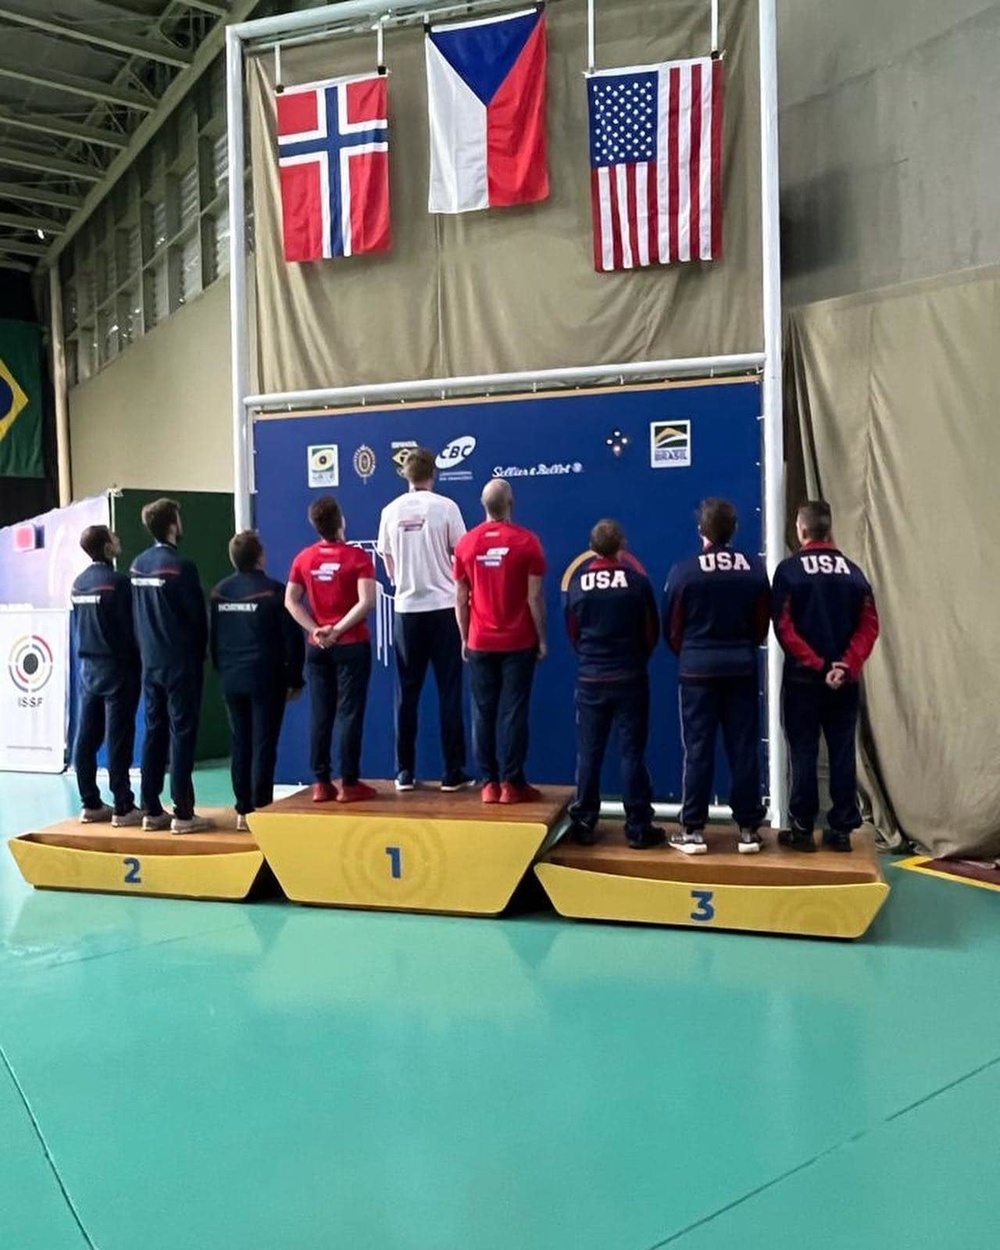 Fort Benning Soldiers win Bronze Medal in Men's Air Rifle Team at World Cup Brazil